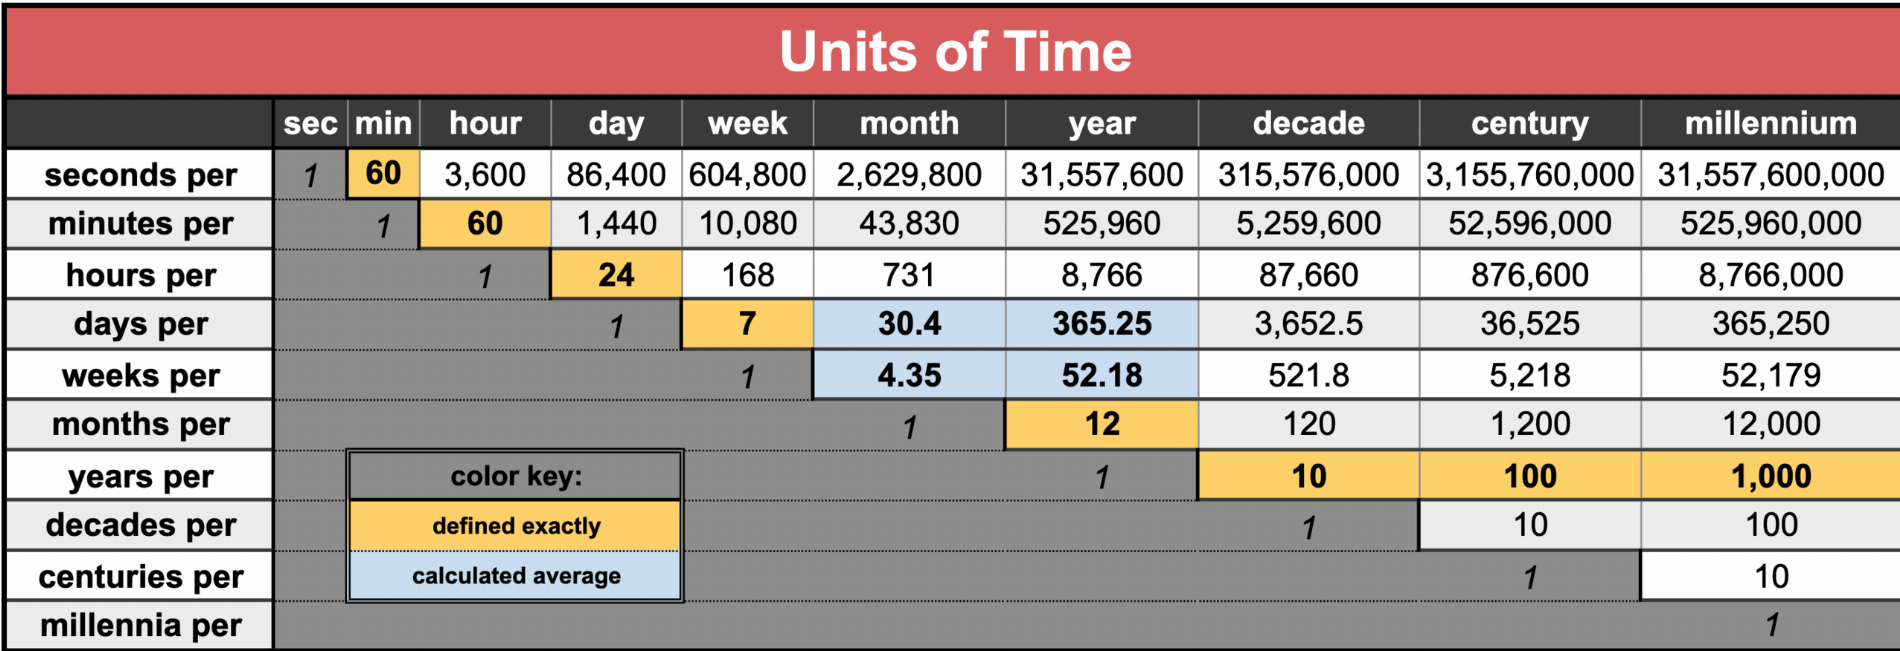 2560px-Units_of_Time_in_tabular_form.png